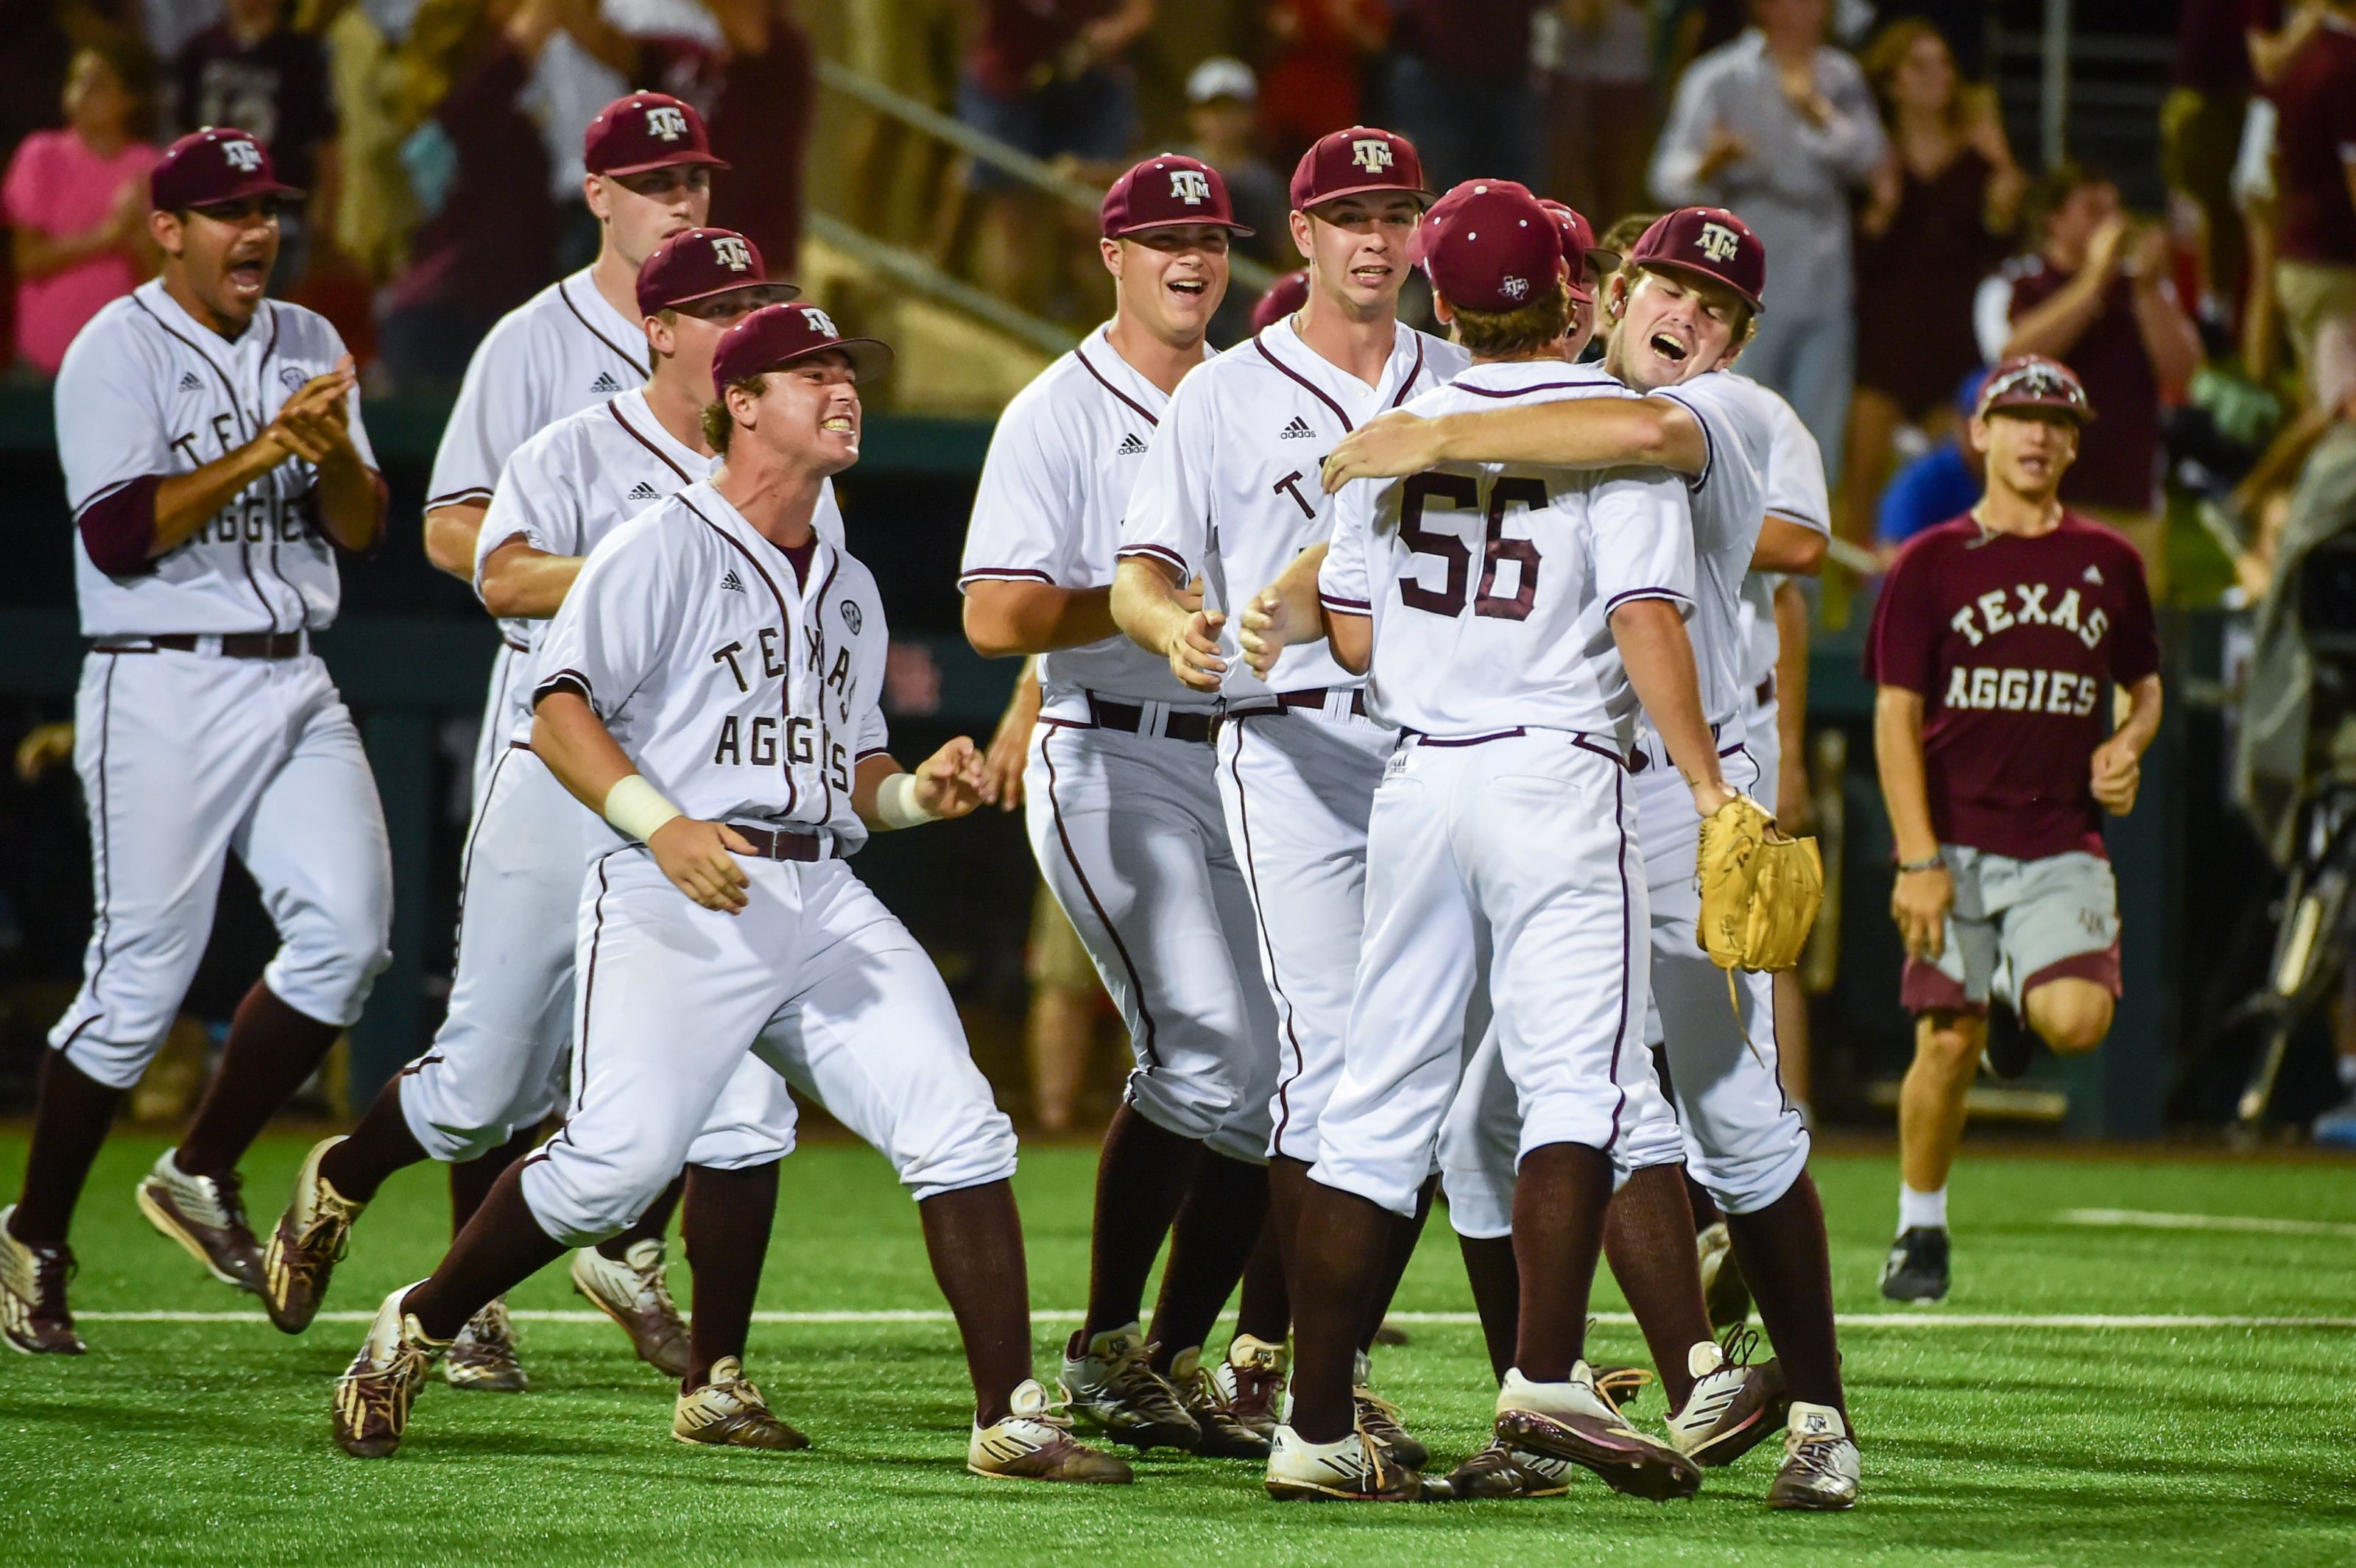 Texas A&M Baseball: Aggies move up in polls with series win over No. 1